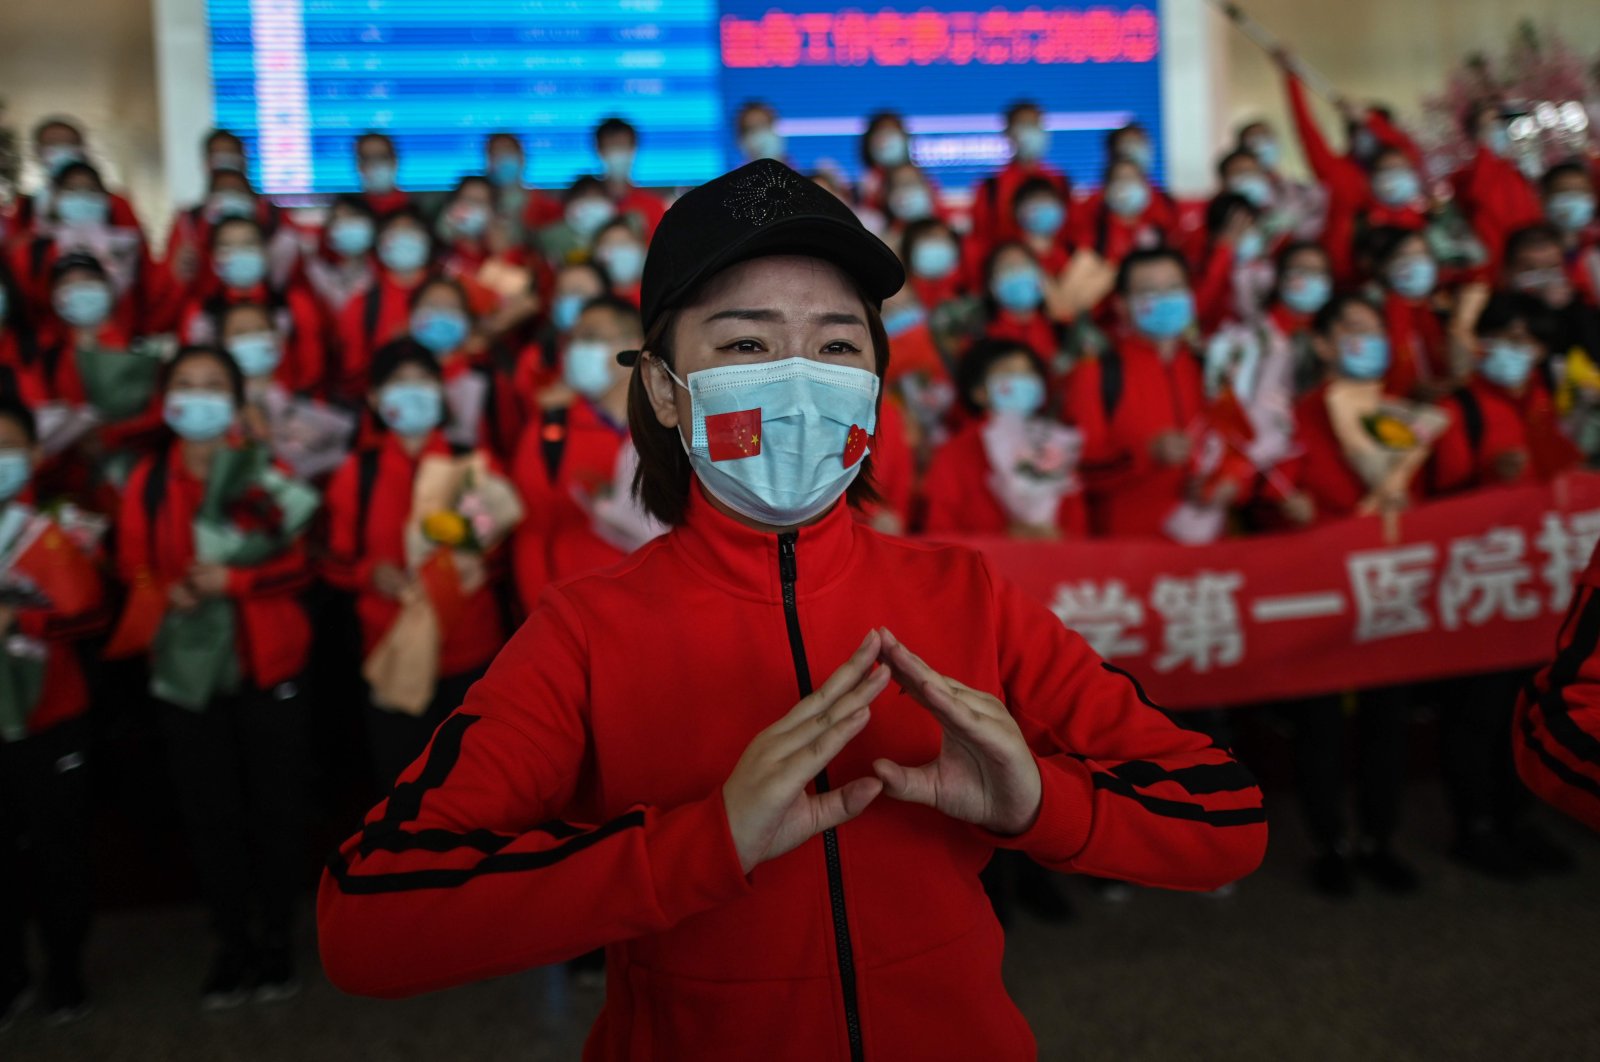 A medical worker from Jilin province tears up during a ceremony as Tianhe Airport is reopened in Wuhan, Hubei province, China, Wednesday, April 8, 2020. (AFP Photo)